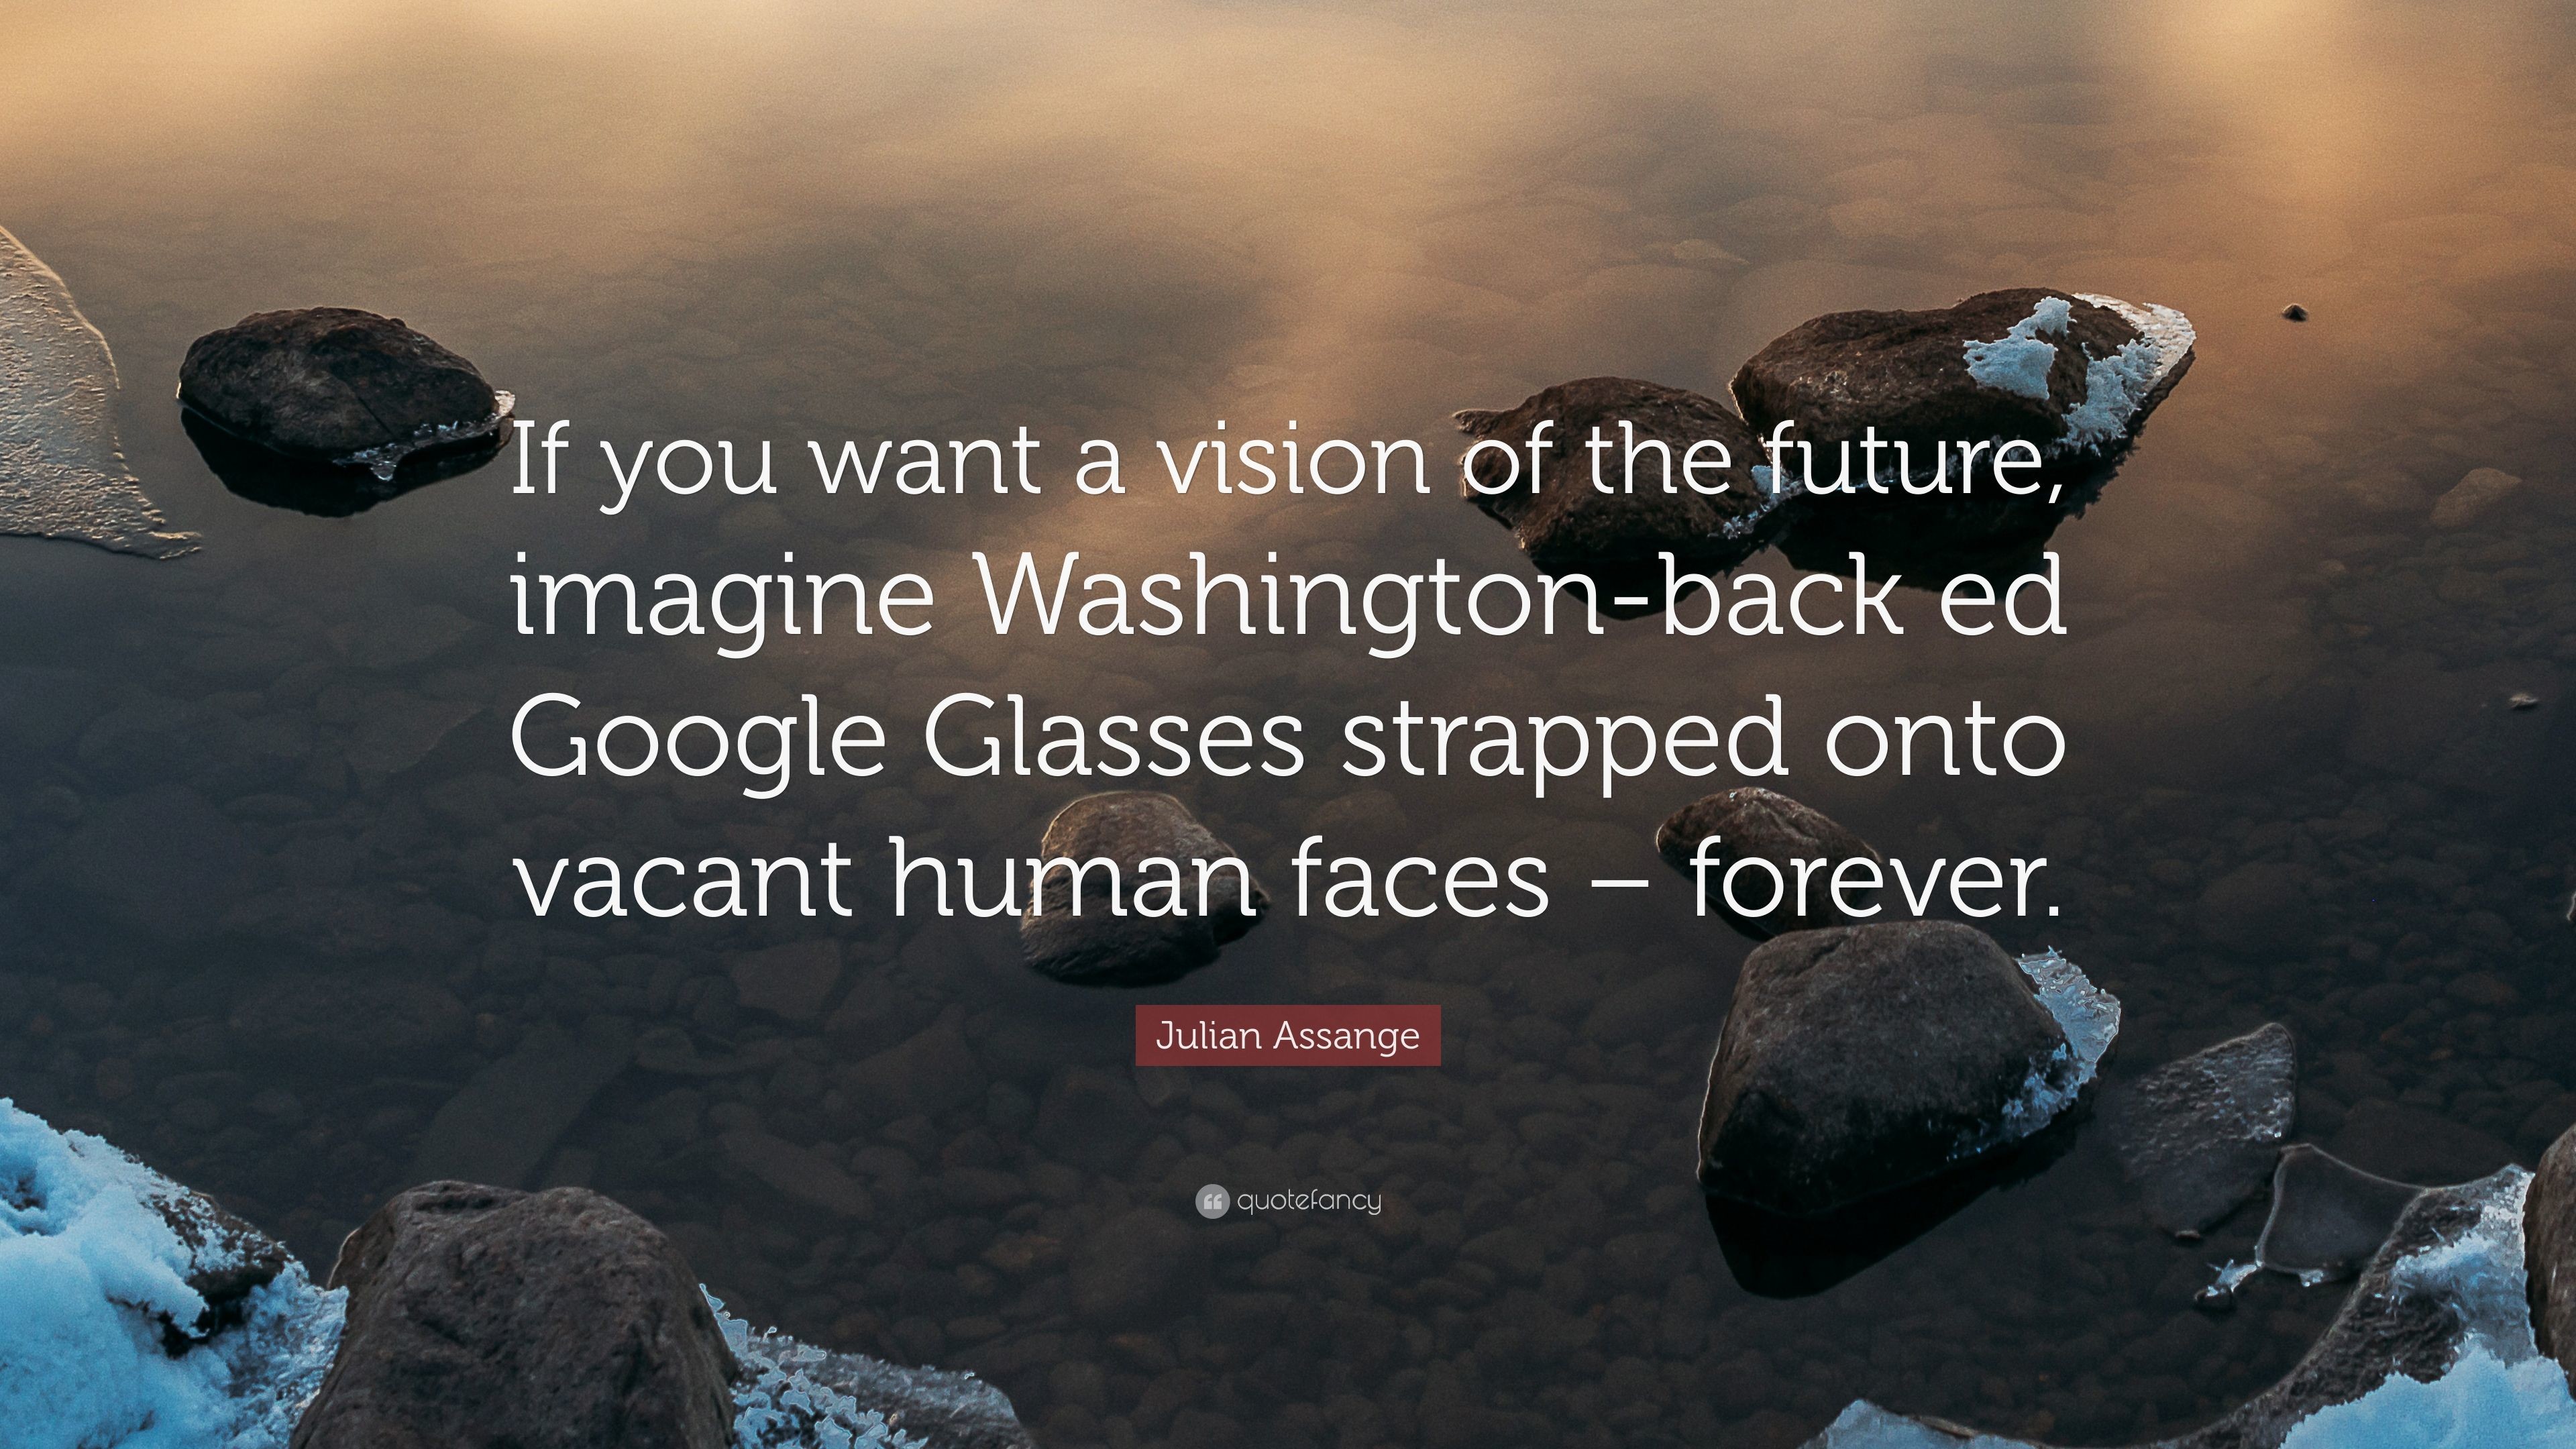 3840x2160 Julian Assange Quote: “If you want a vision of the future, imagine  Washington